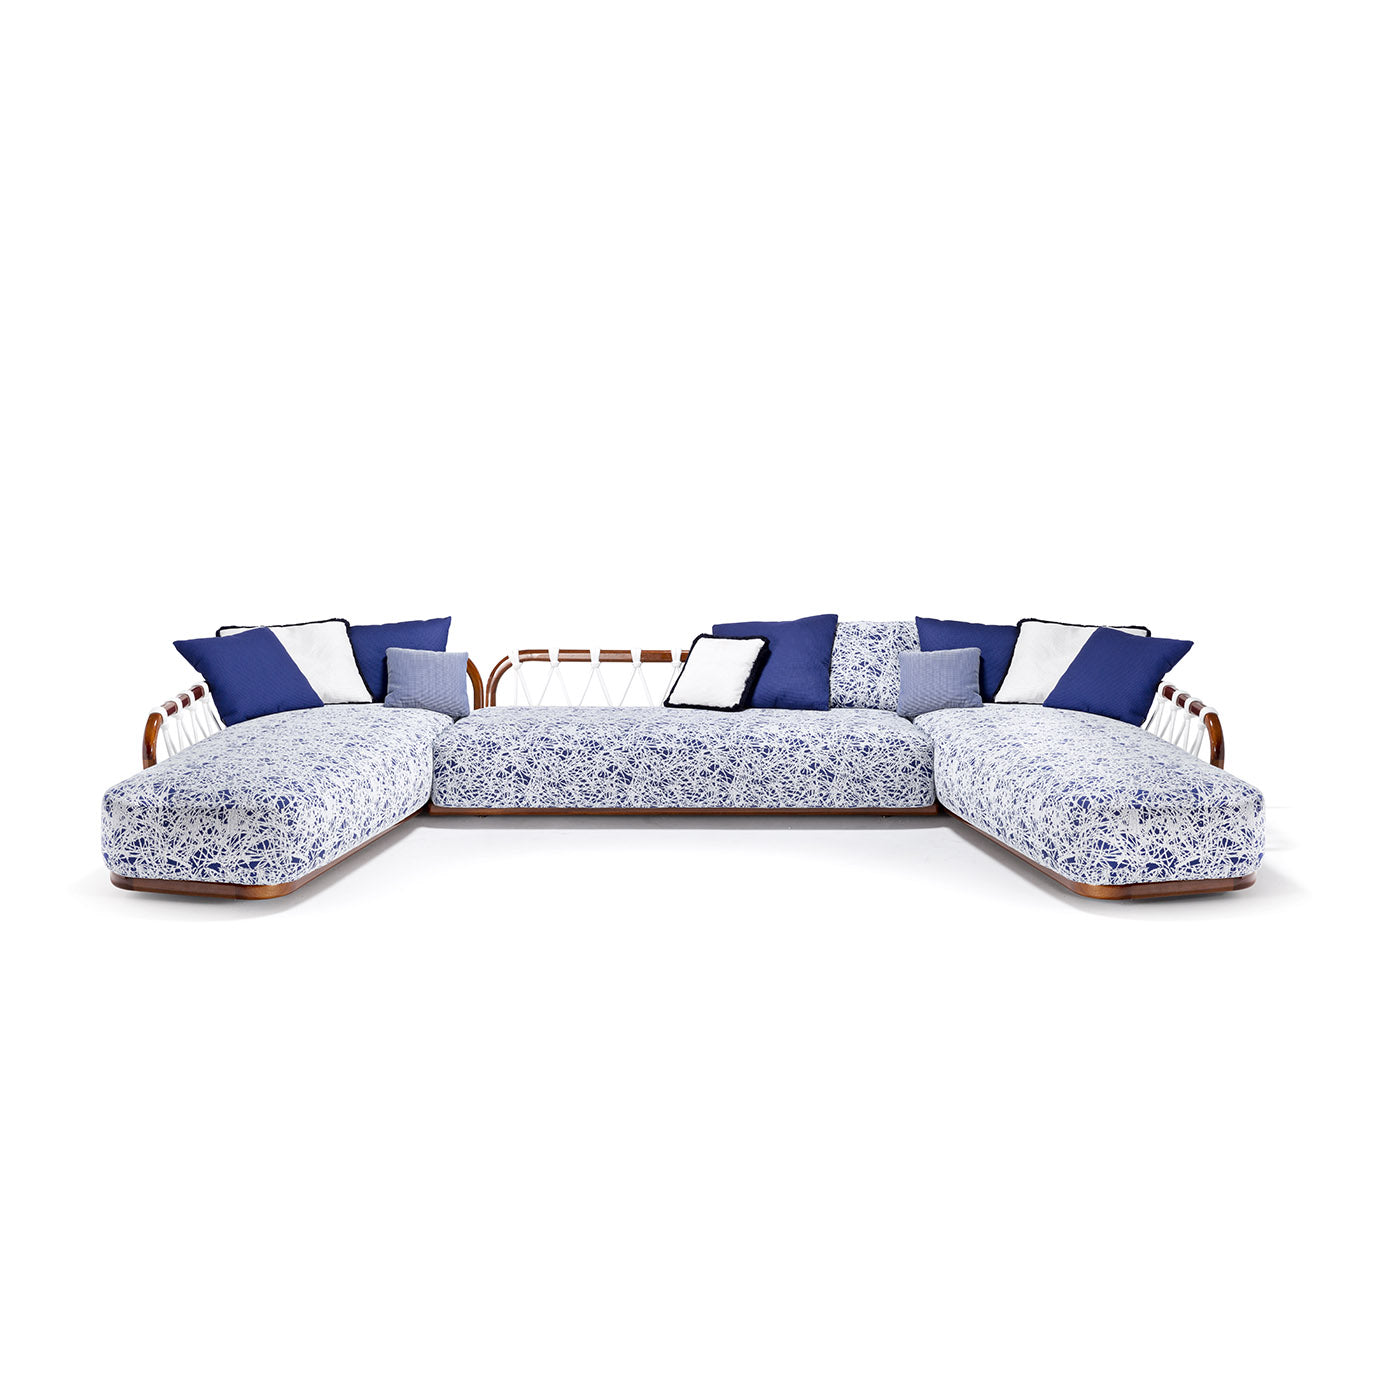 Sunset Basket Blue & White Central Element by Paola Navone & AMP - Alternative view 2